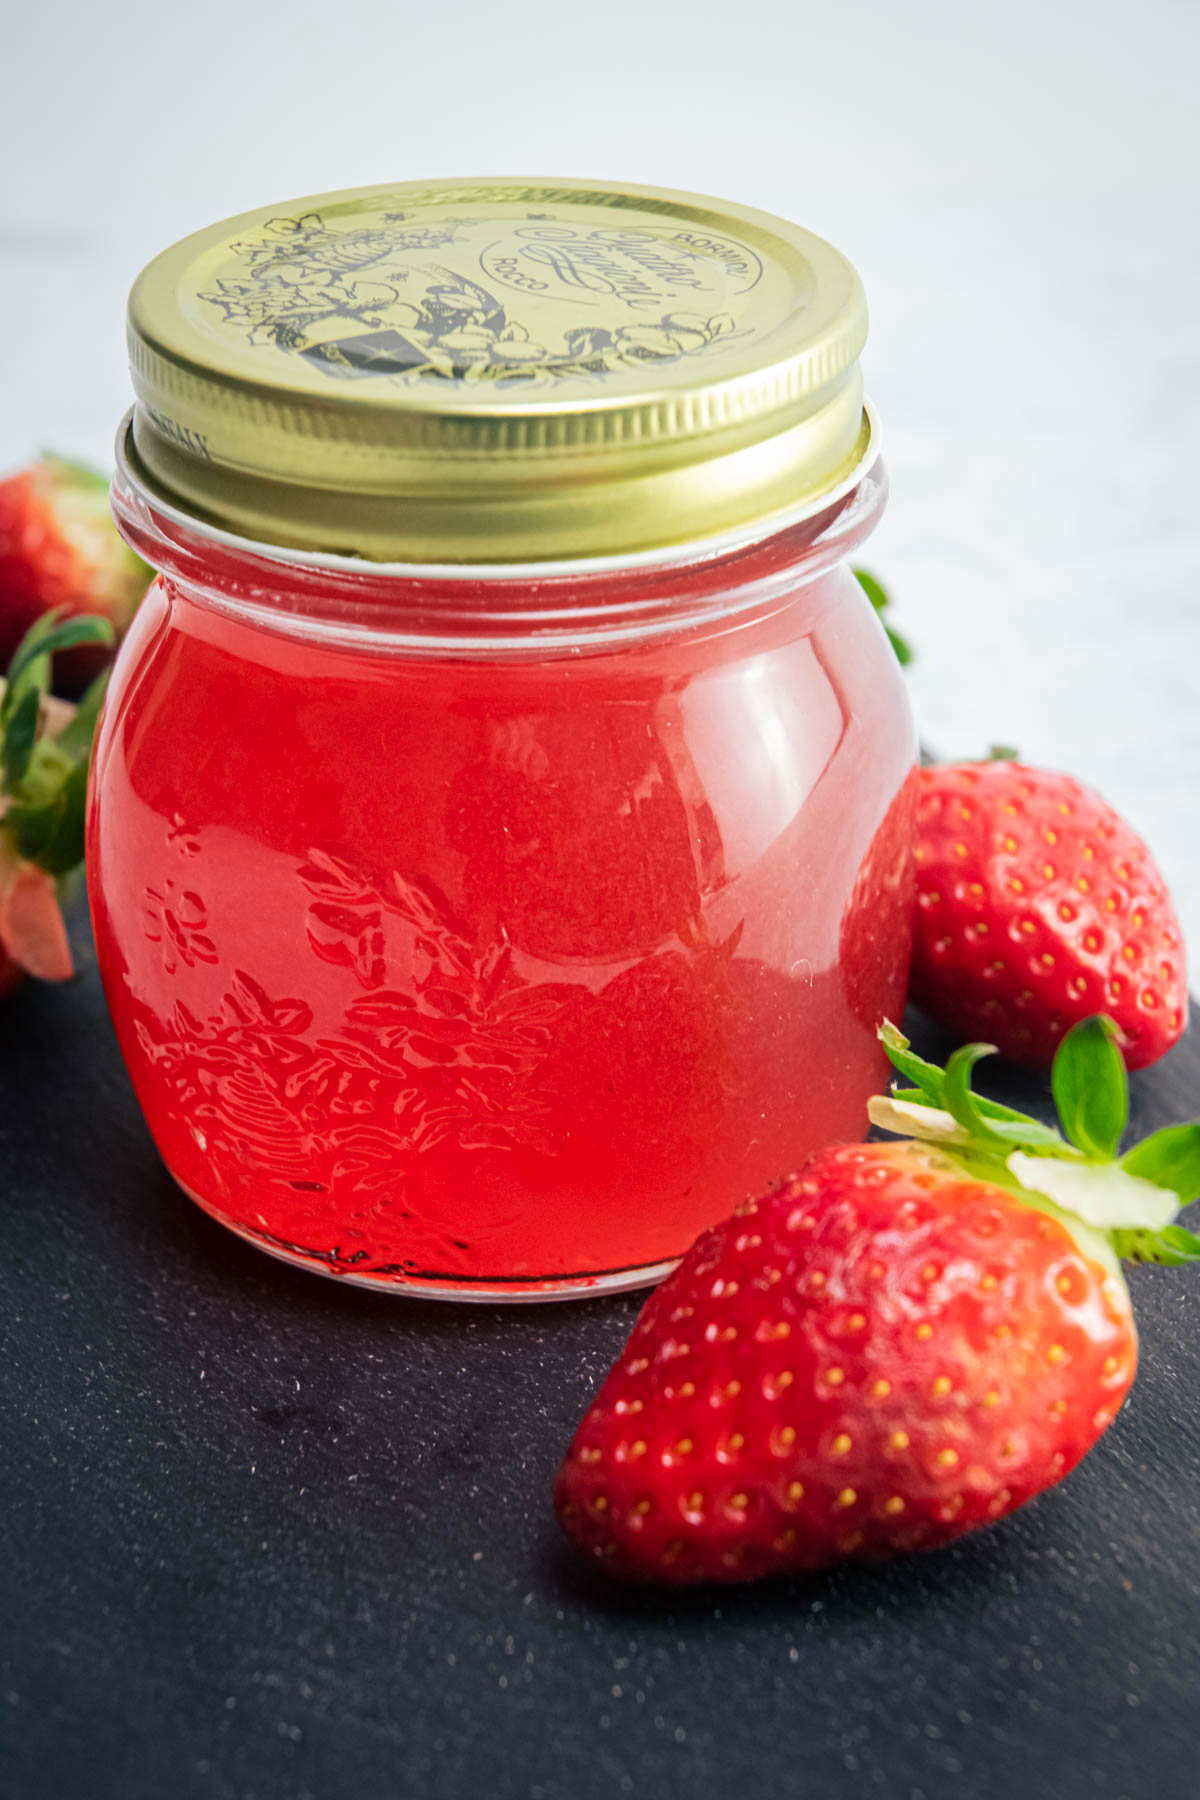 Strawberry liqueur in a jar, fresh strawberries on the side.